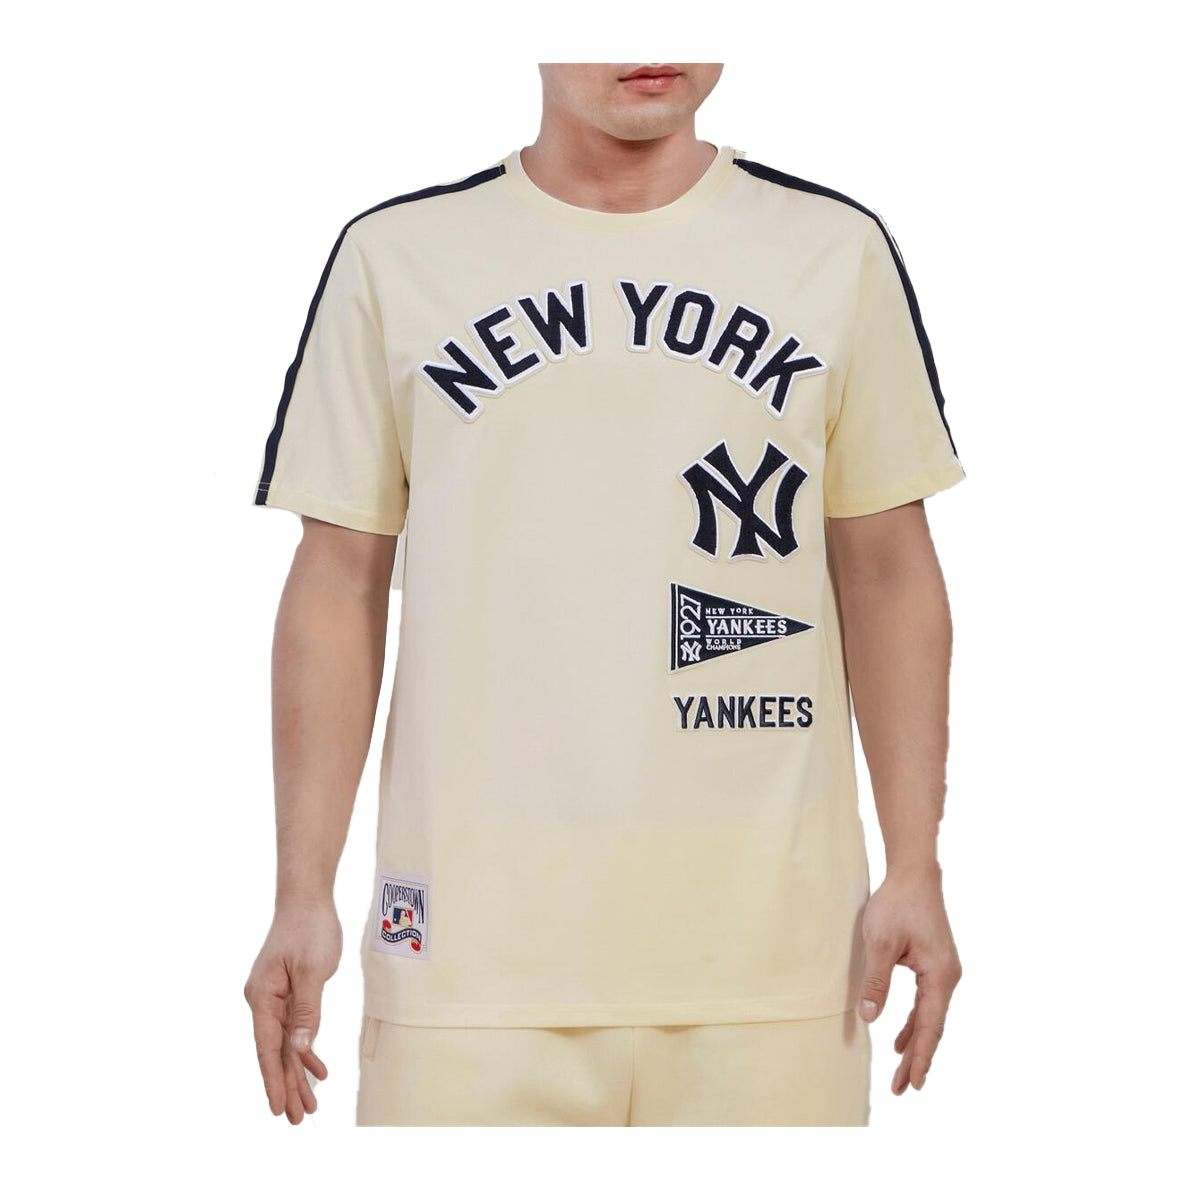 Official New York Yankees Gear, Yankees Jerseys, Store, NY Pro